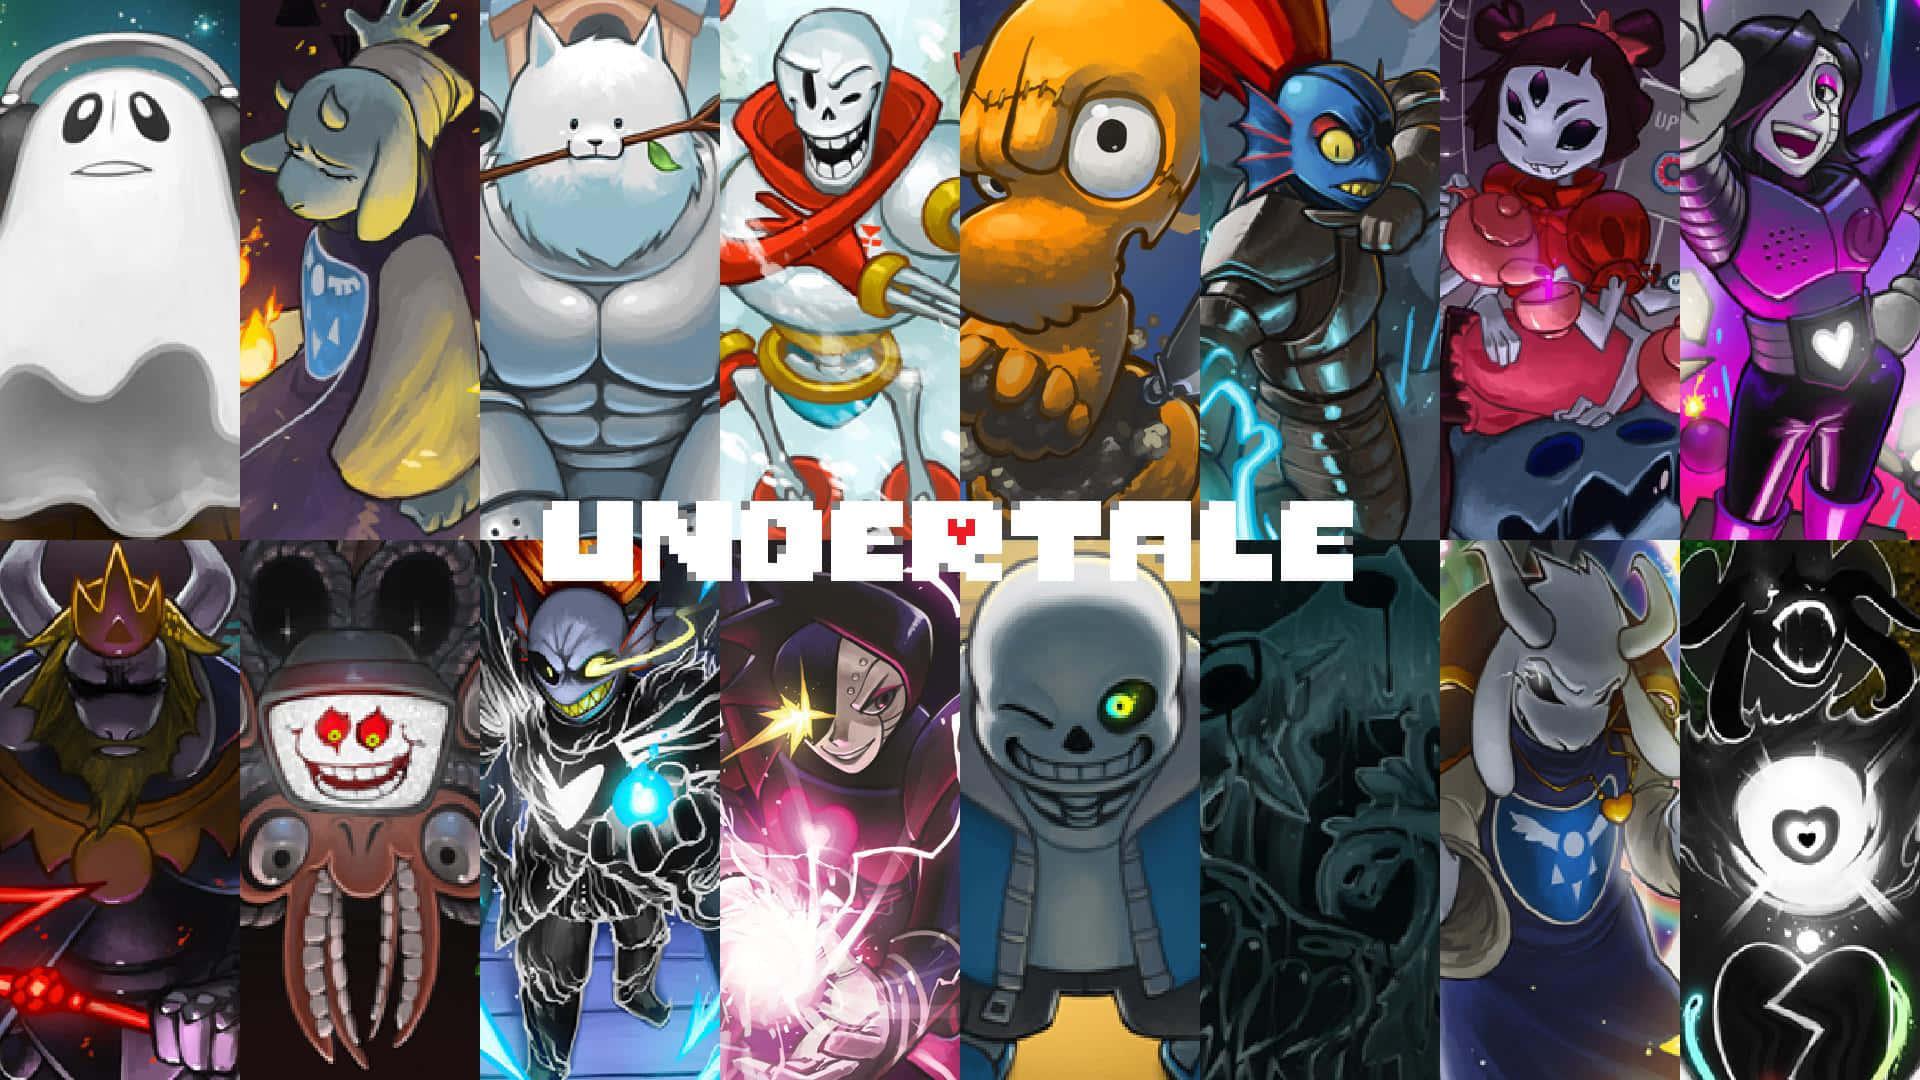 Join Frisk on their journey of adventure and inner growth in Undertale.